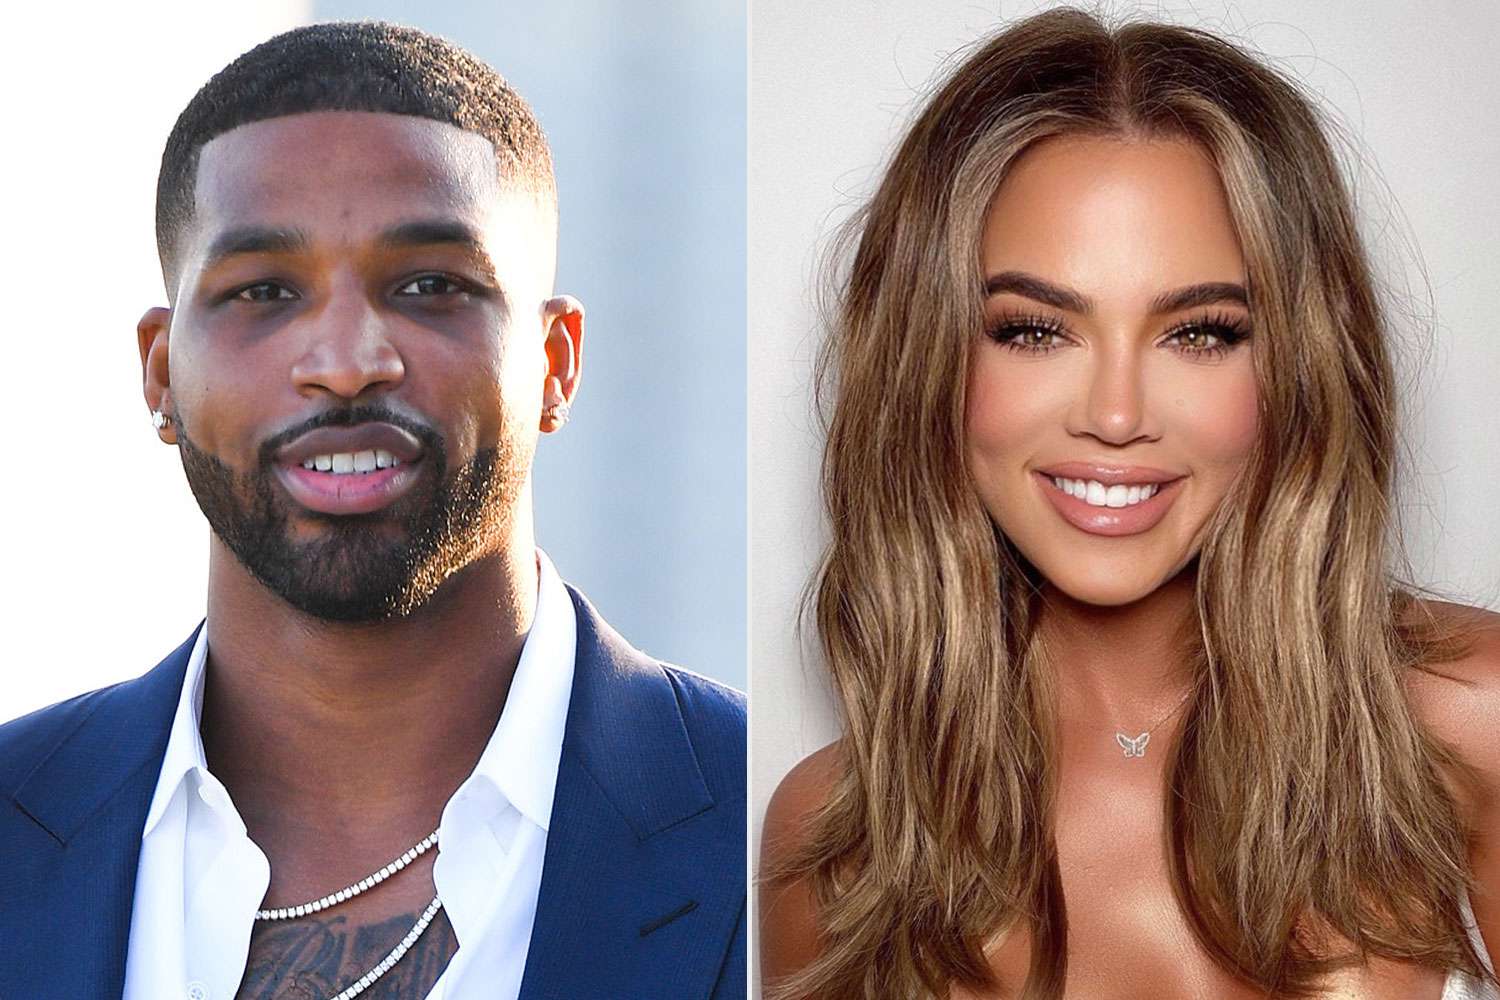 KhloÃ© Kardashian Says She and Tristan Thompson Are 'In a Really Good Space' Co-Parenting True - MSN Money